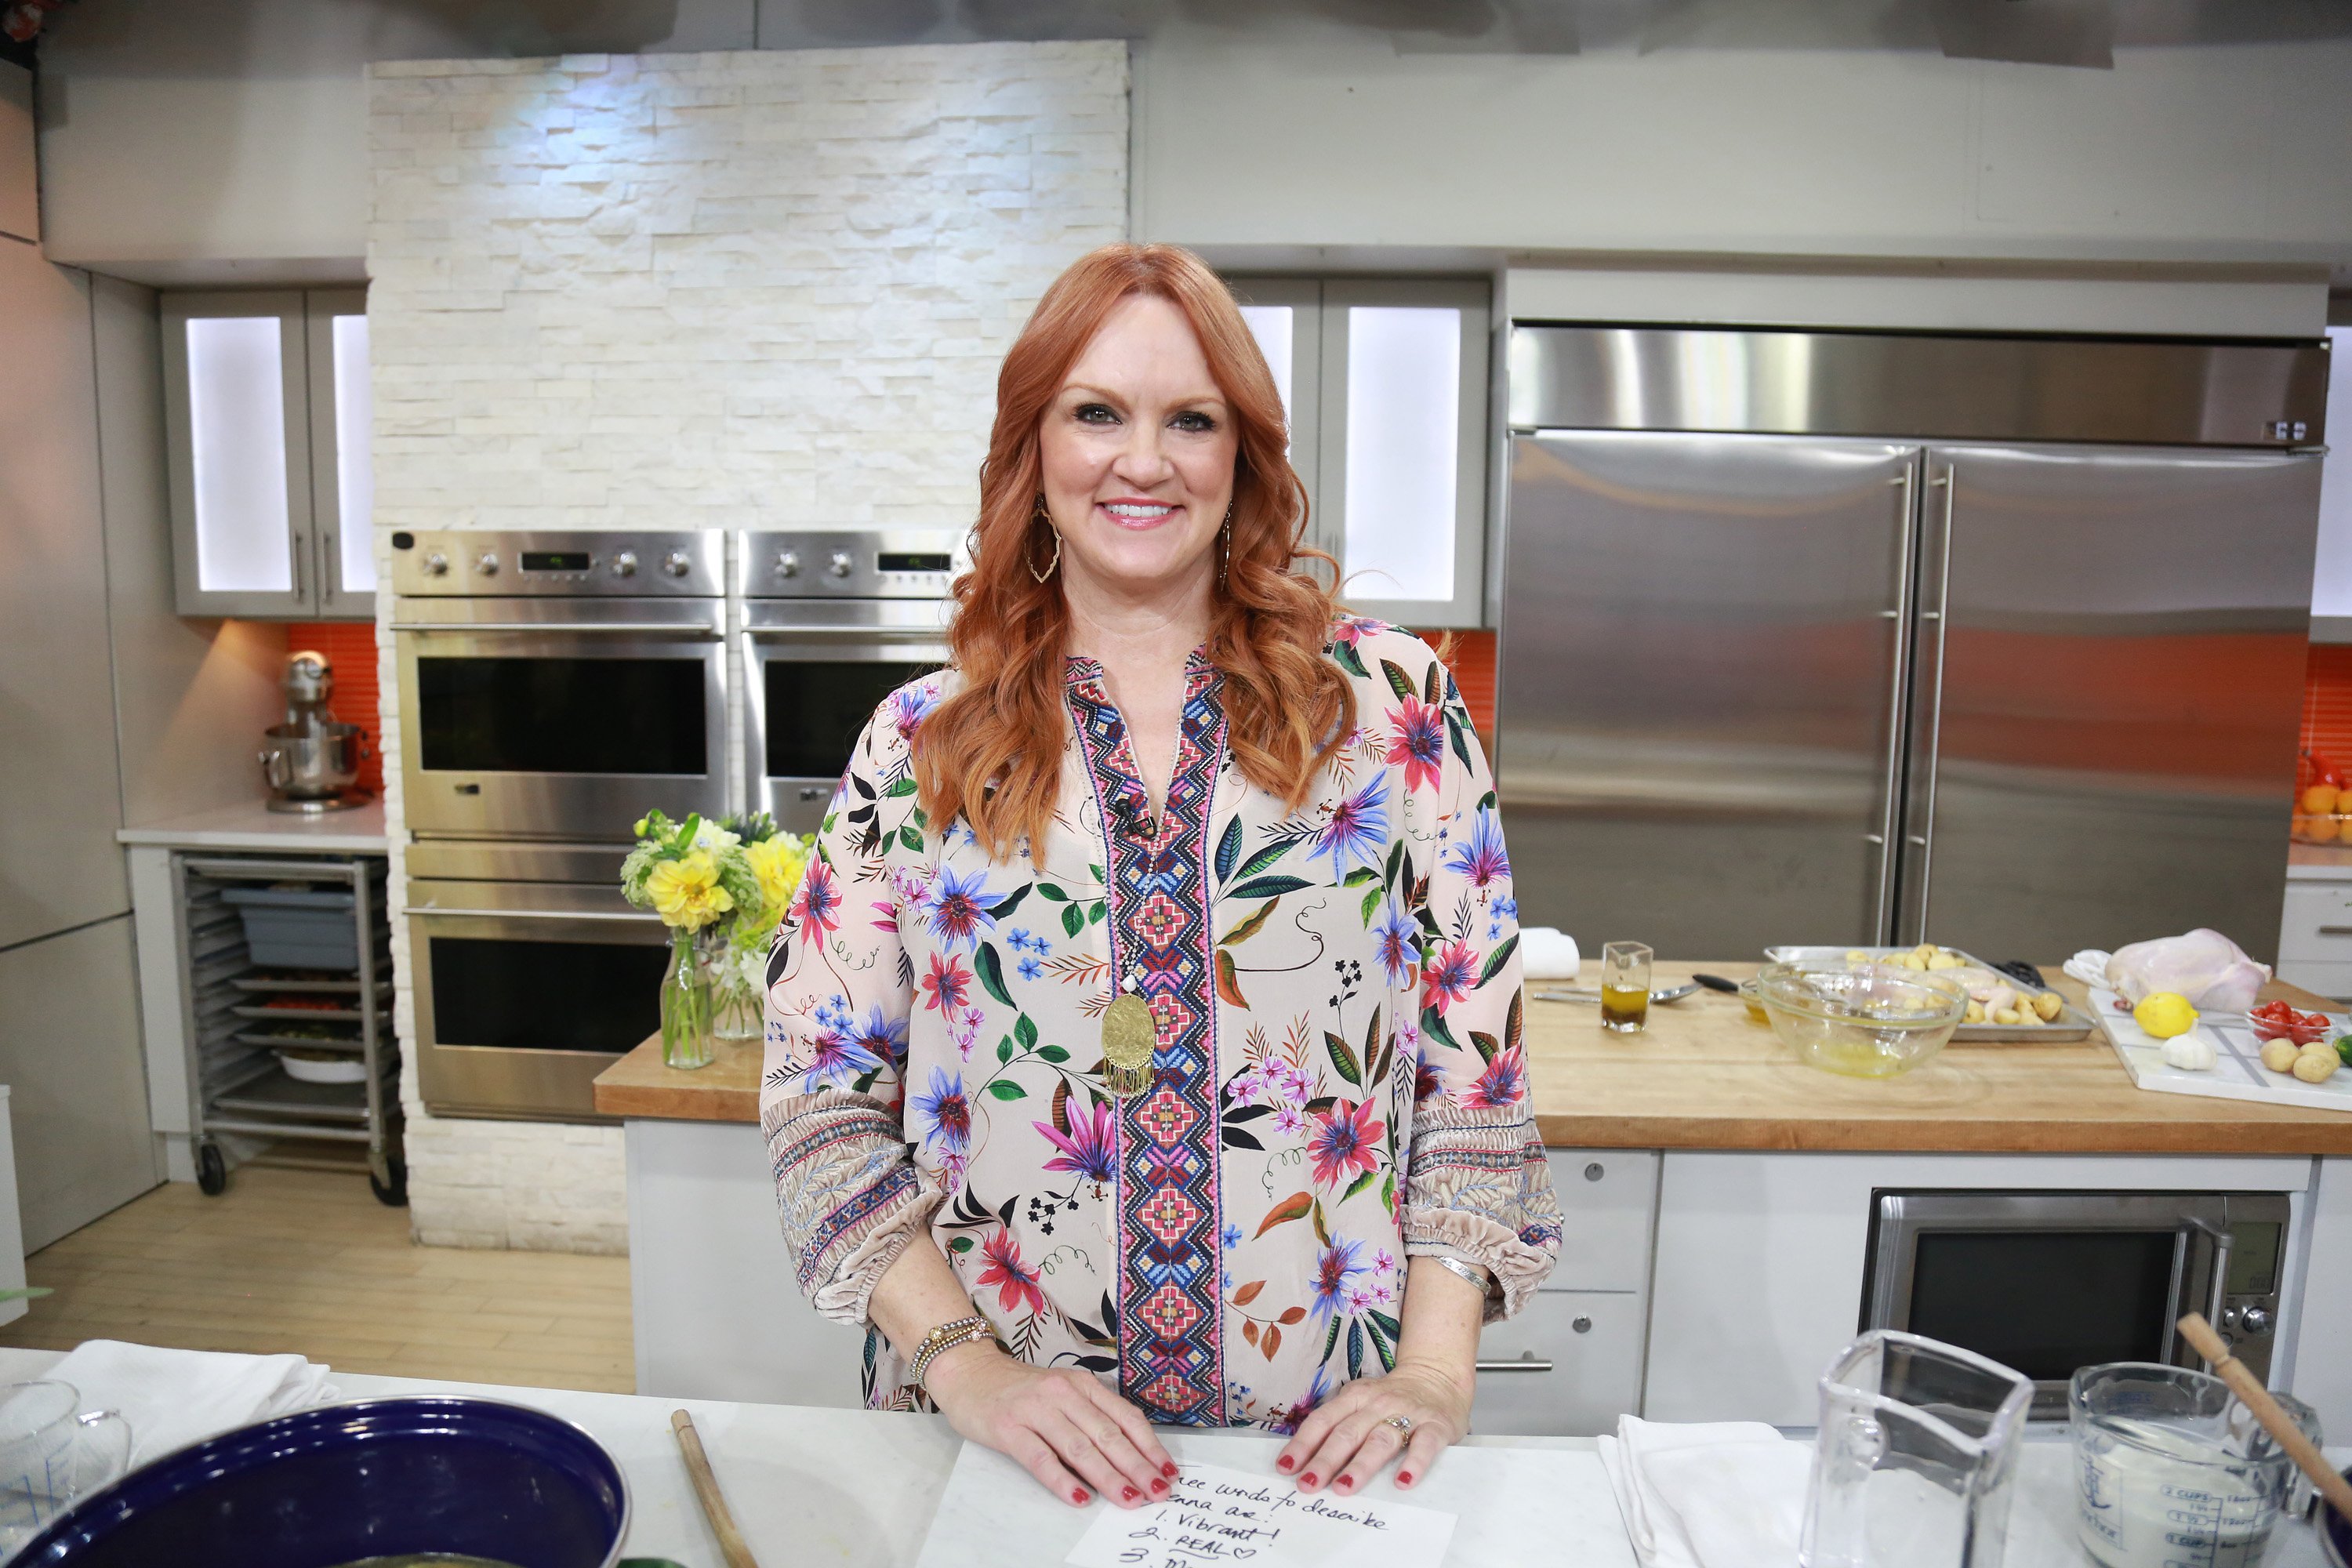 Food Network's The Pioneer Woman, Ree Drummond, smiles as she stands at a kitchen counter